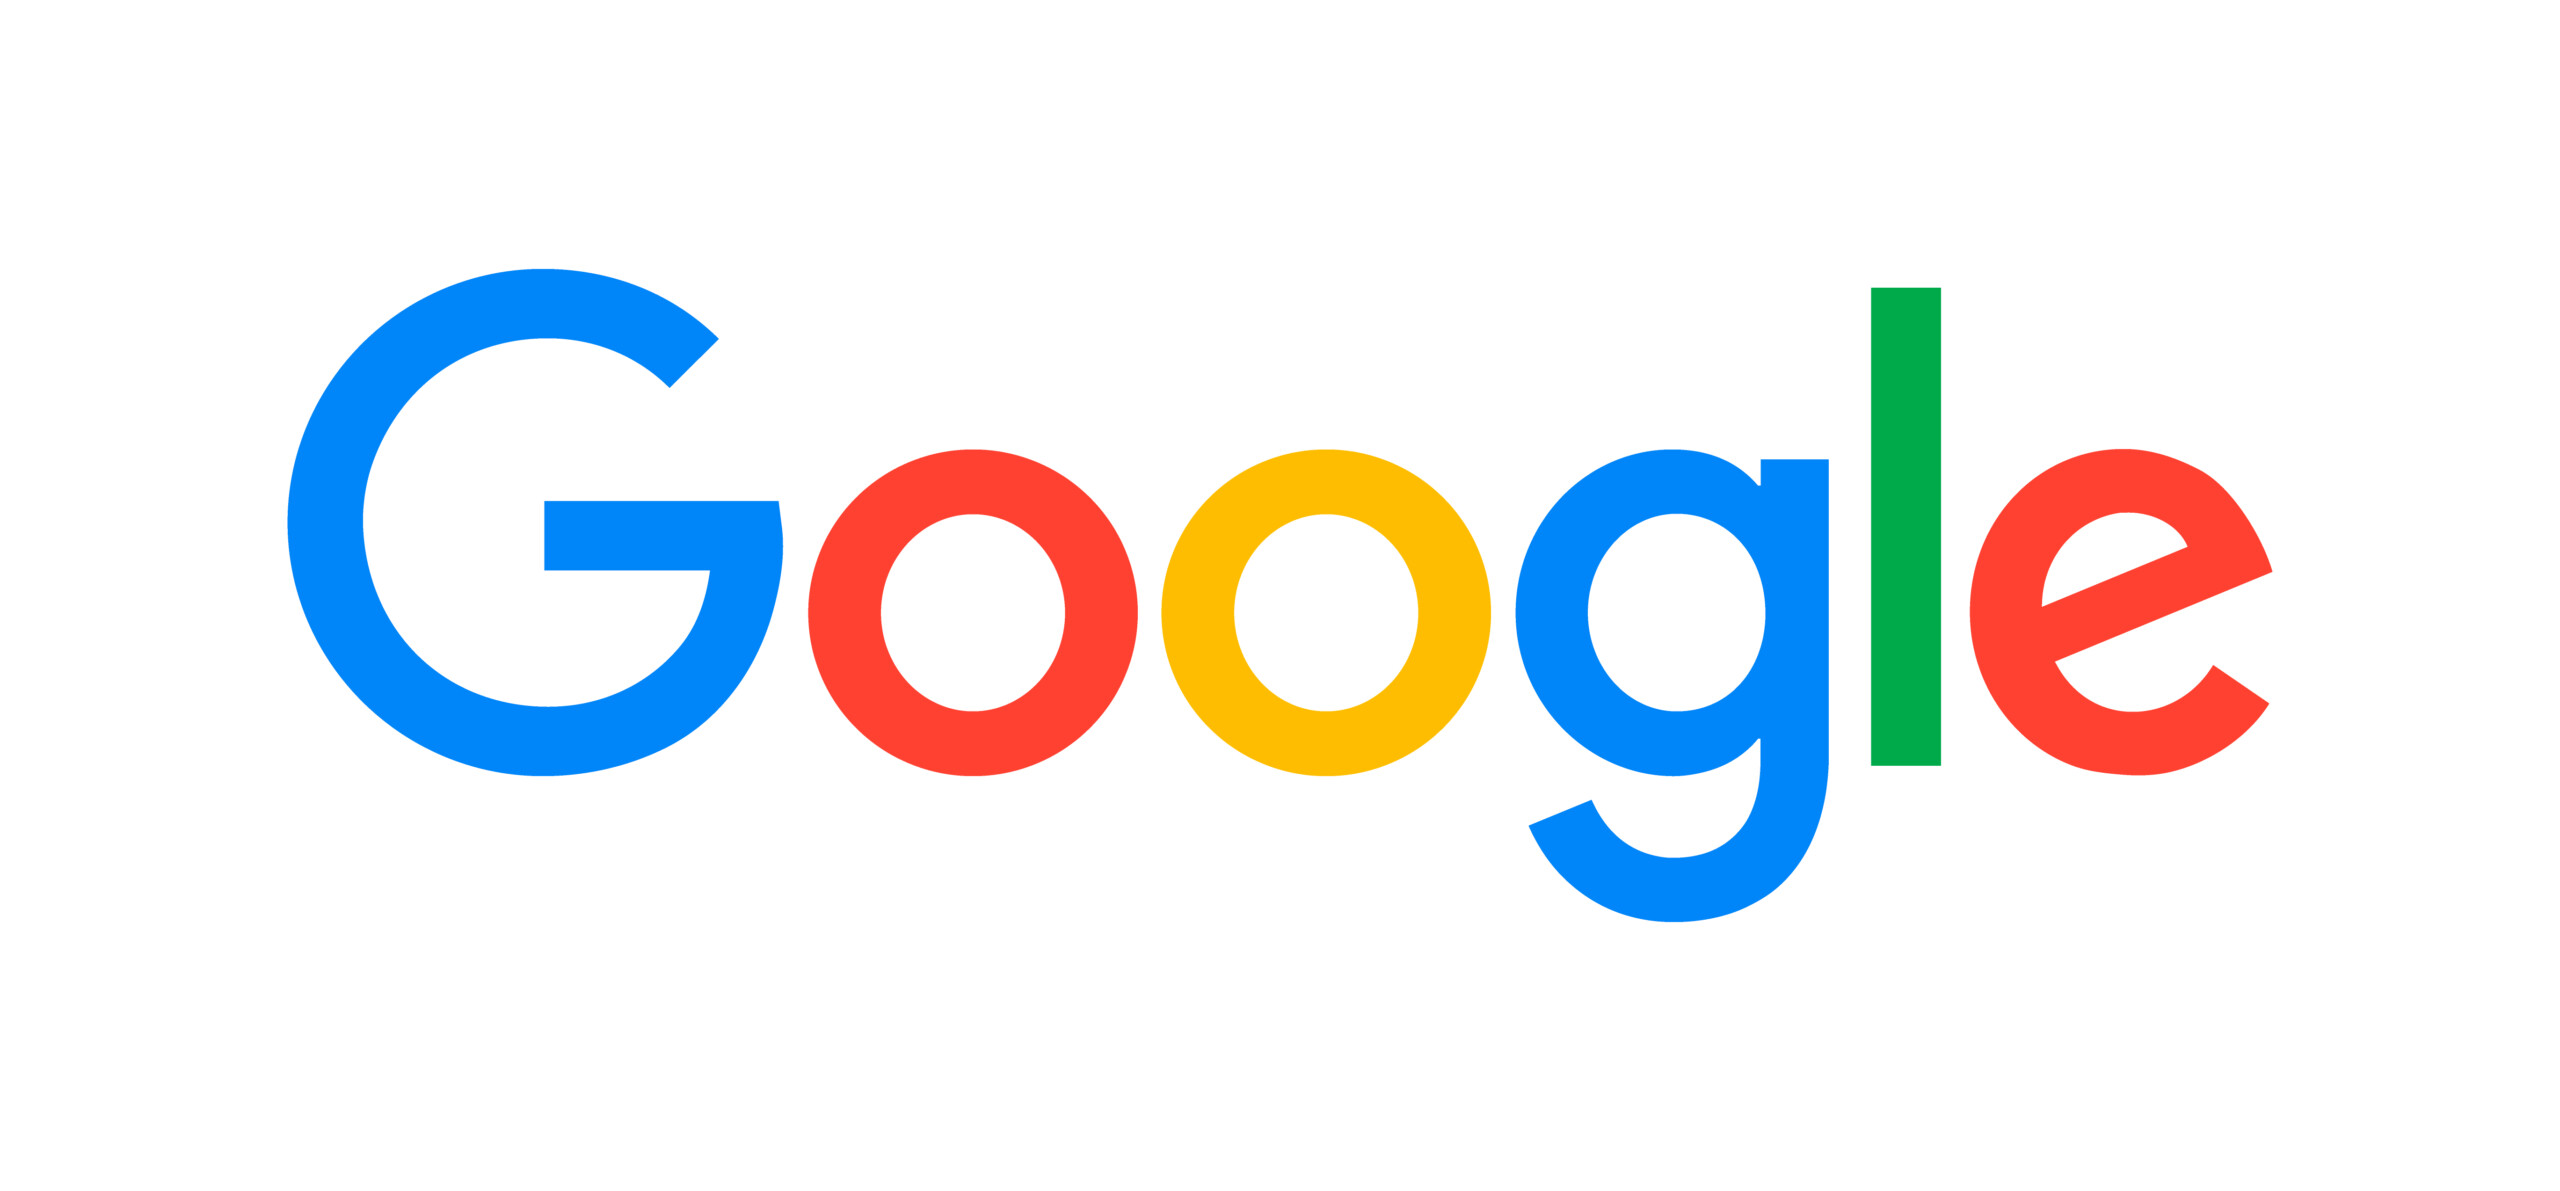 google-logo-to-showcase-connections